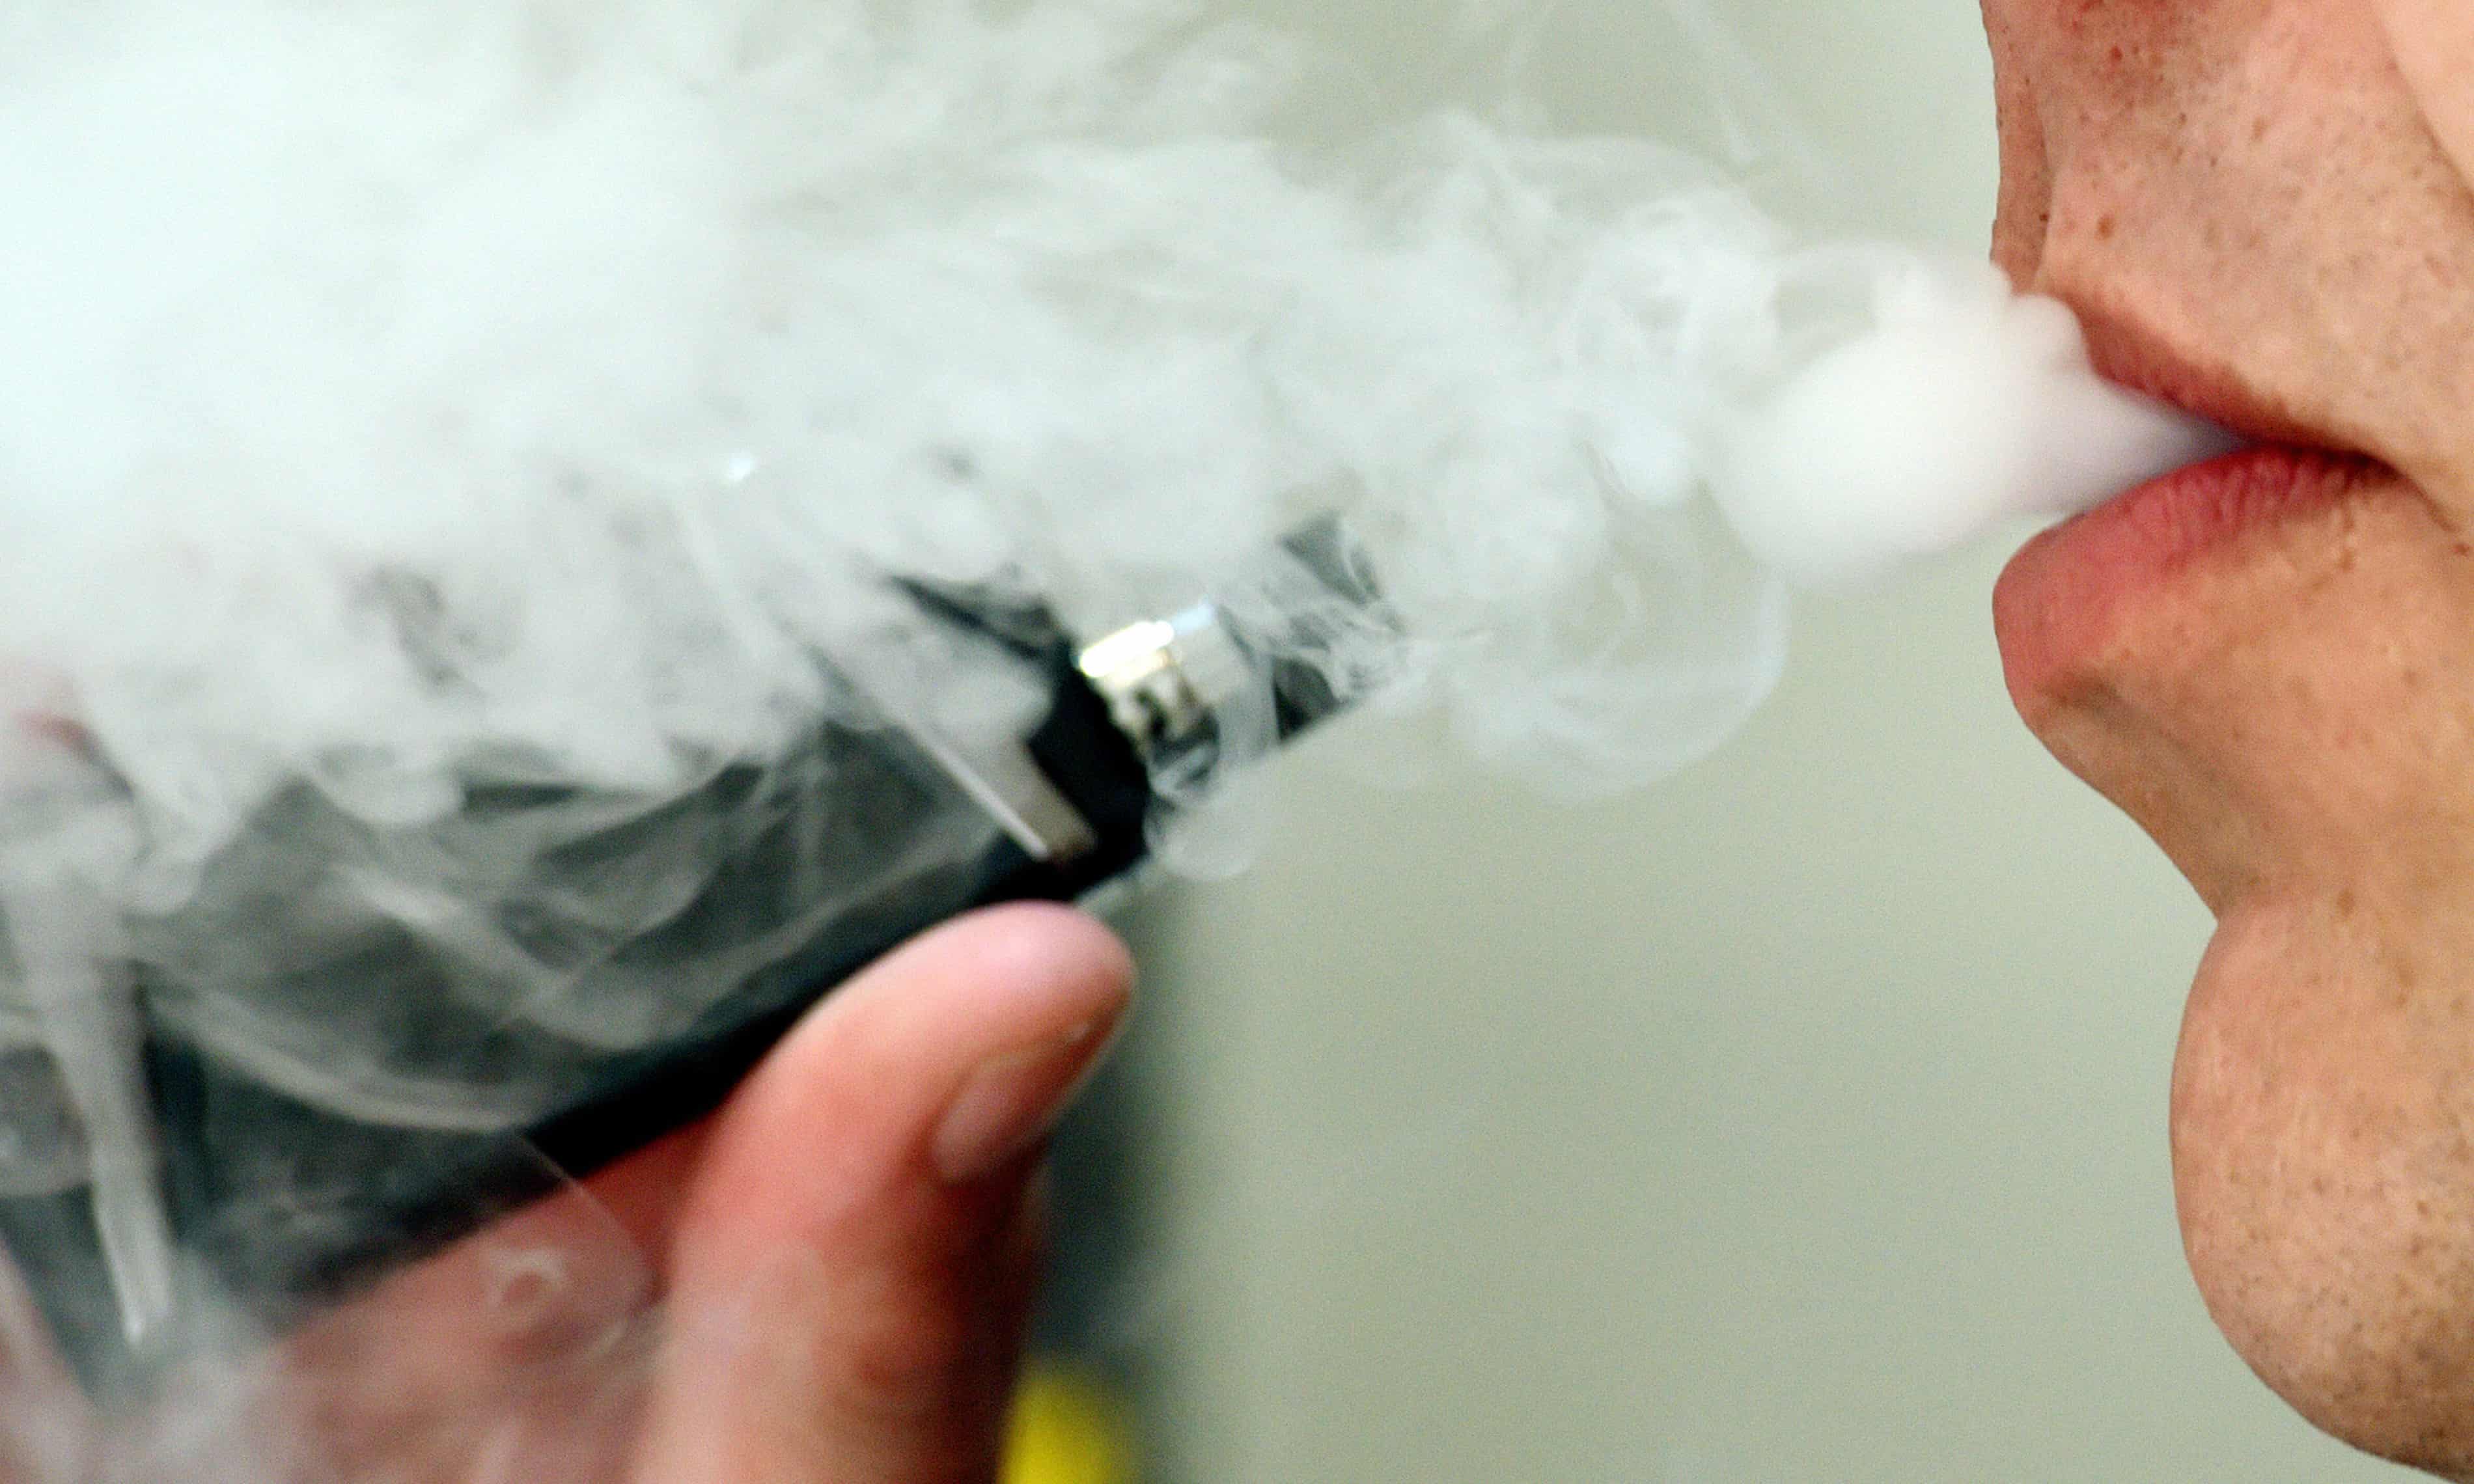 Chemicals in vapes could be highly toxic when heated, research finds (theguardian.com)